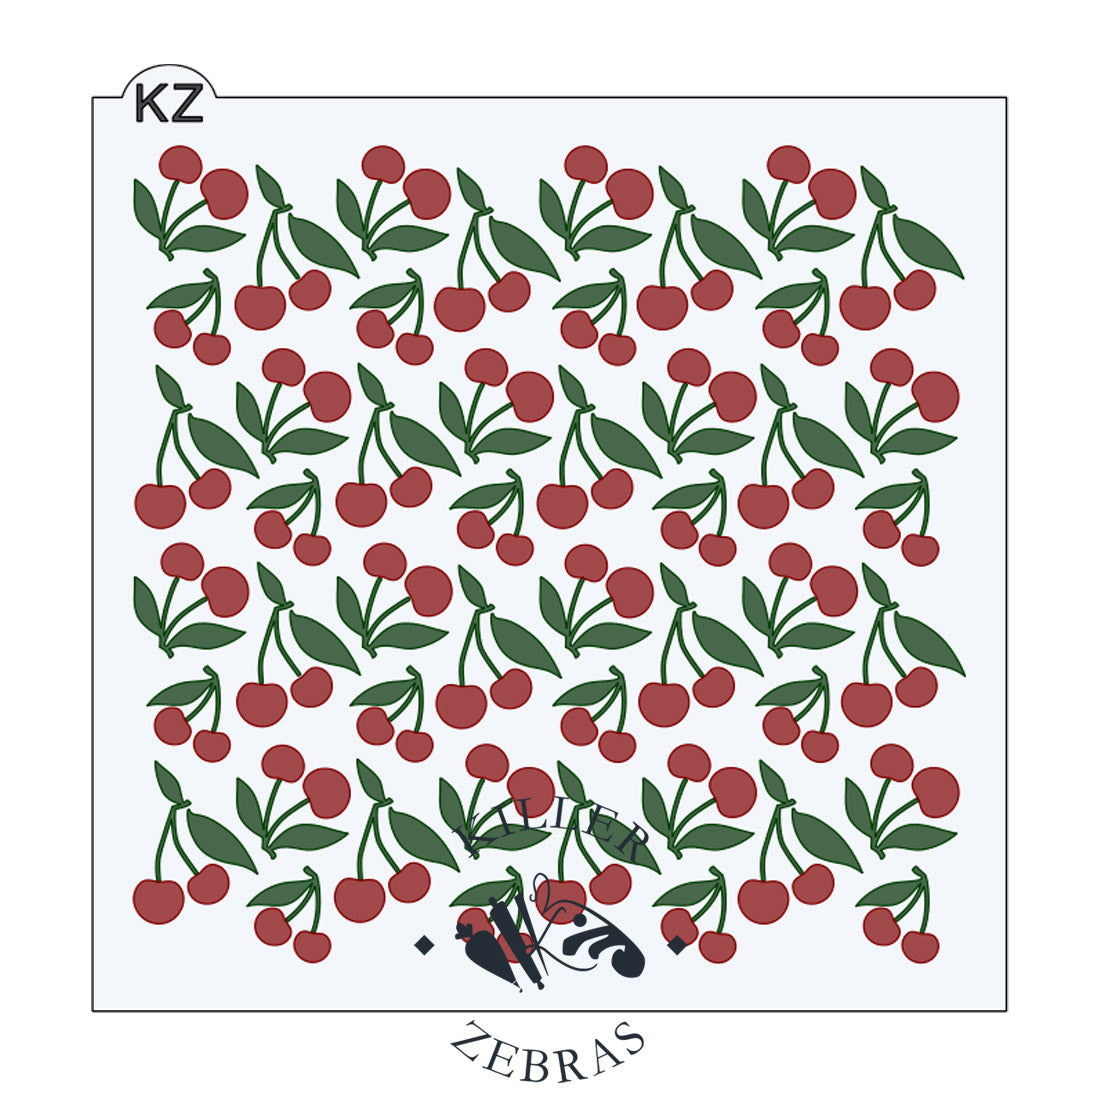 Large, square stencil with red cherries and green stems/leaves filling the page.